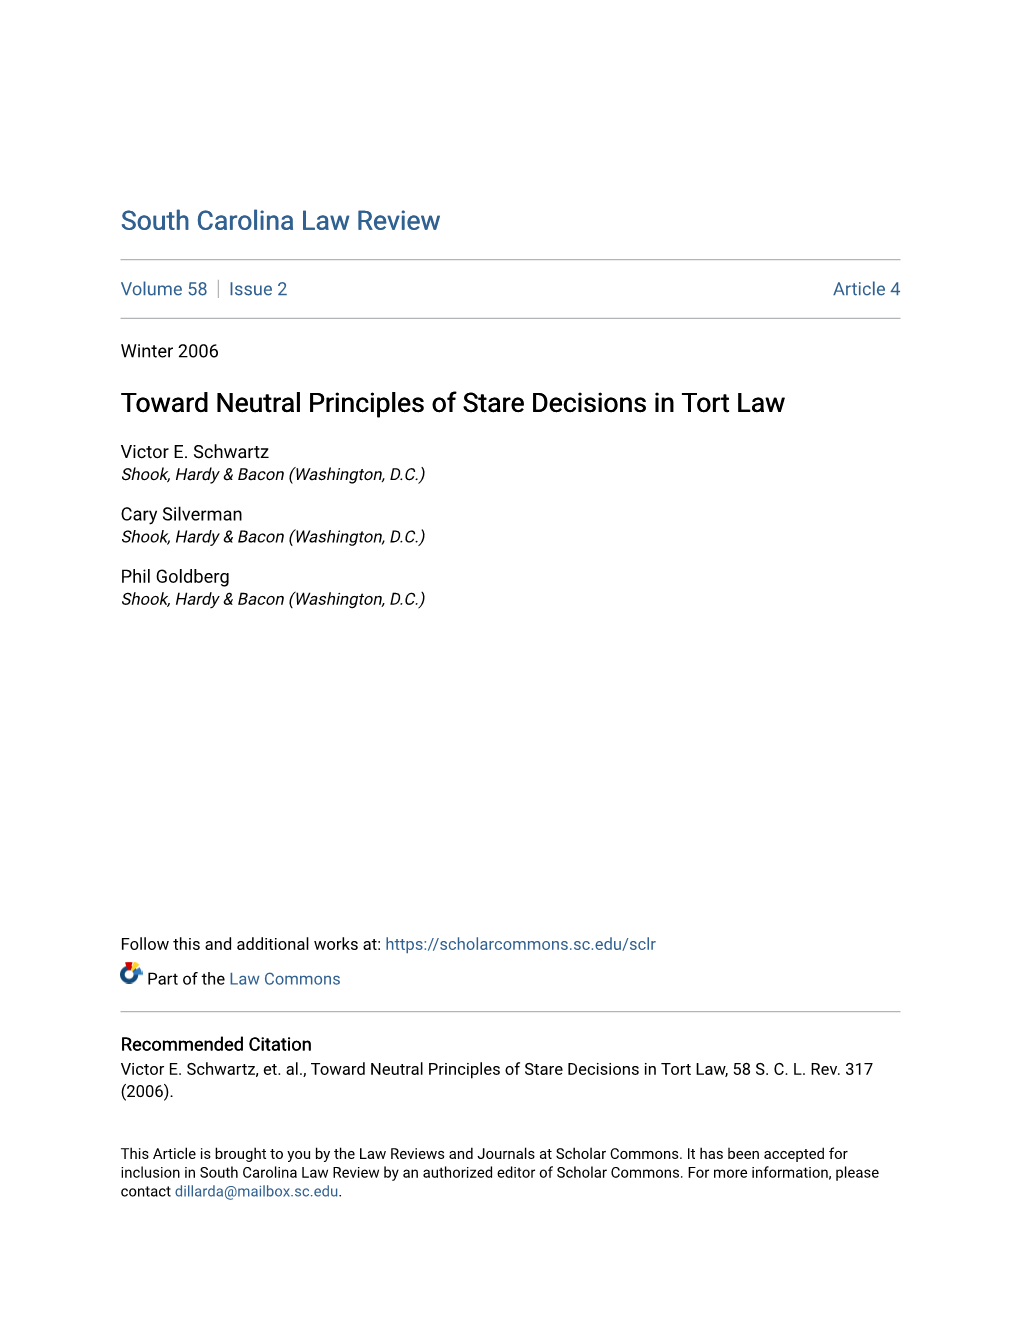 Toward Neutral Principles of Stare Decisions in Tort Law